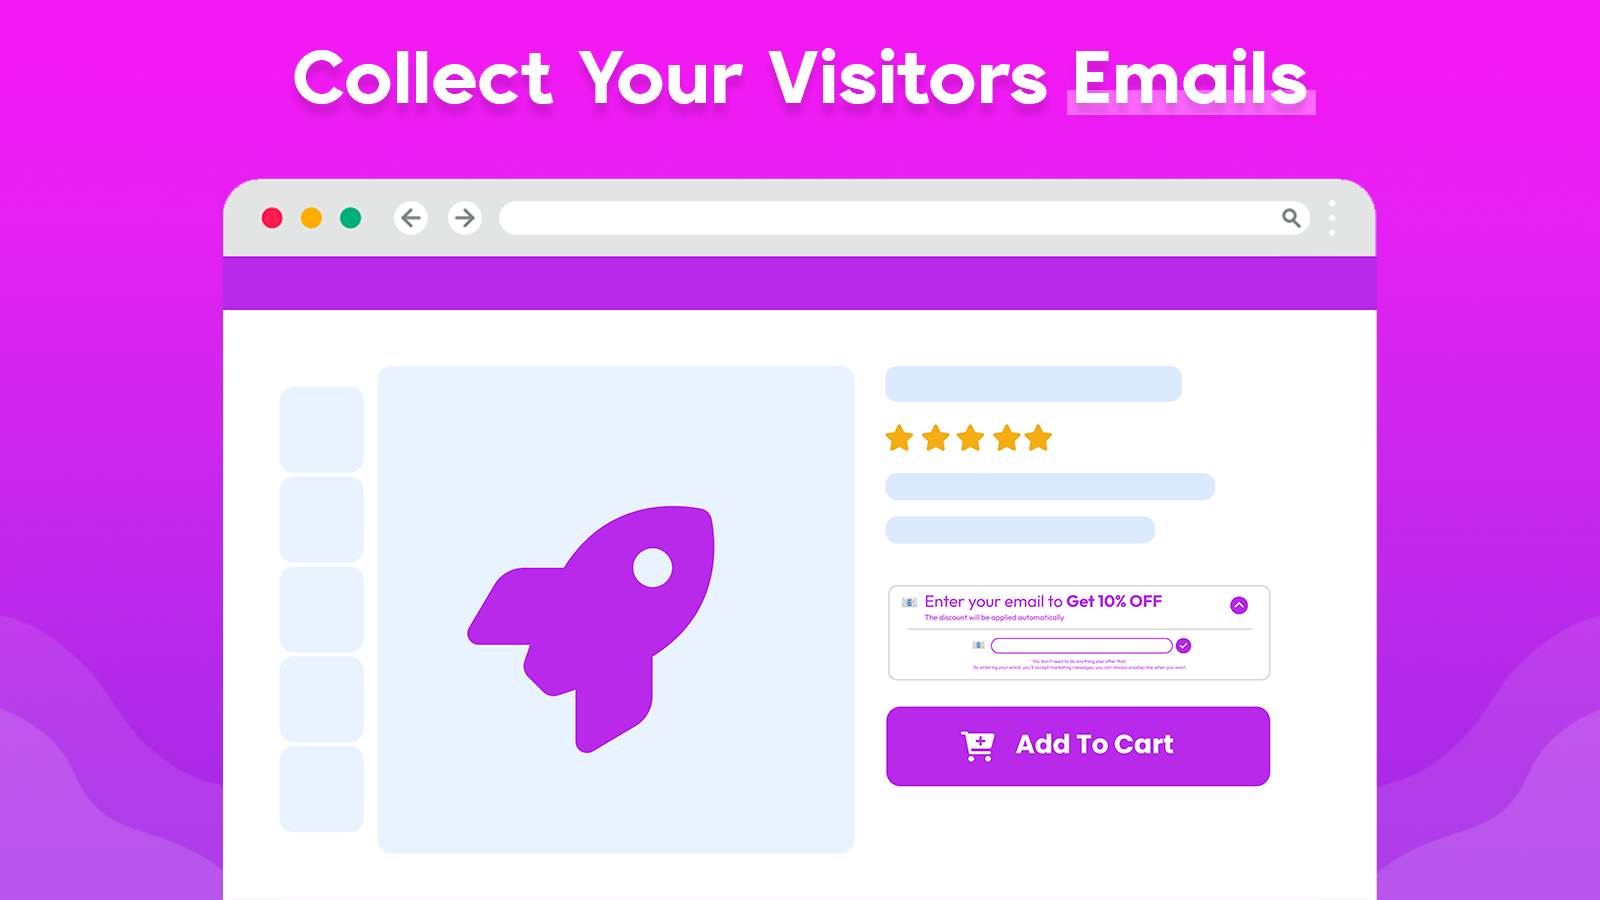 Collect your visitors emails